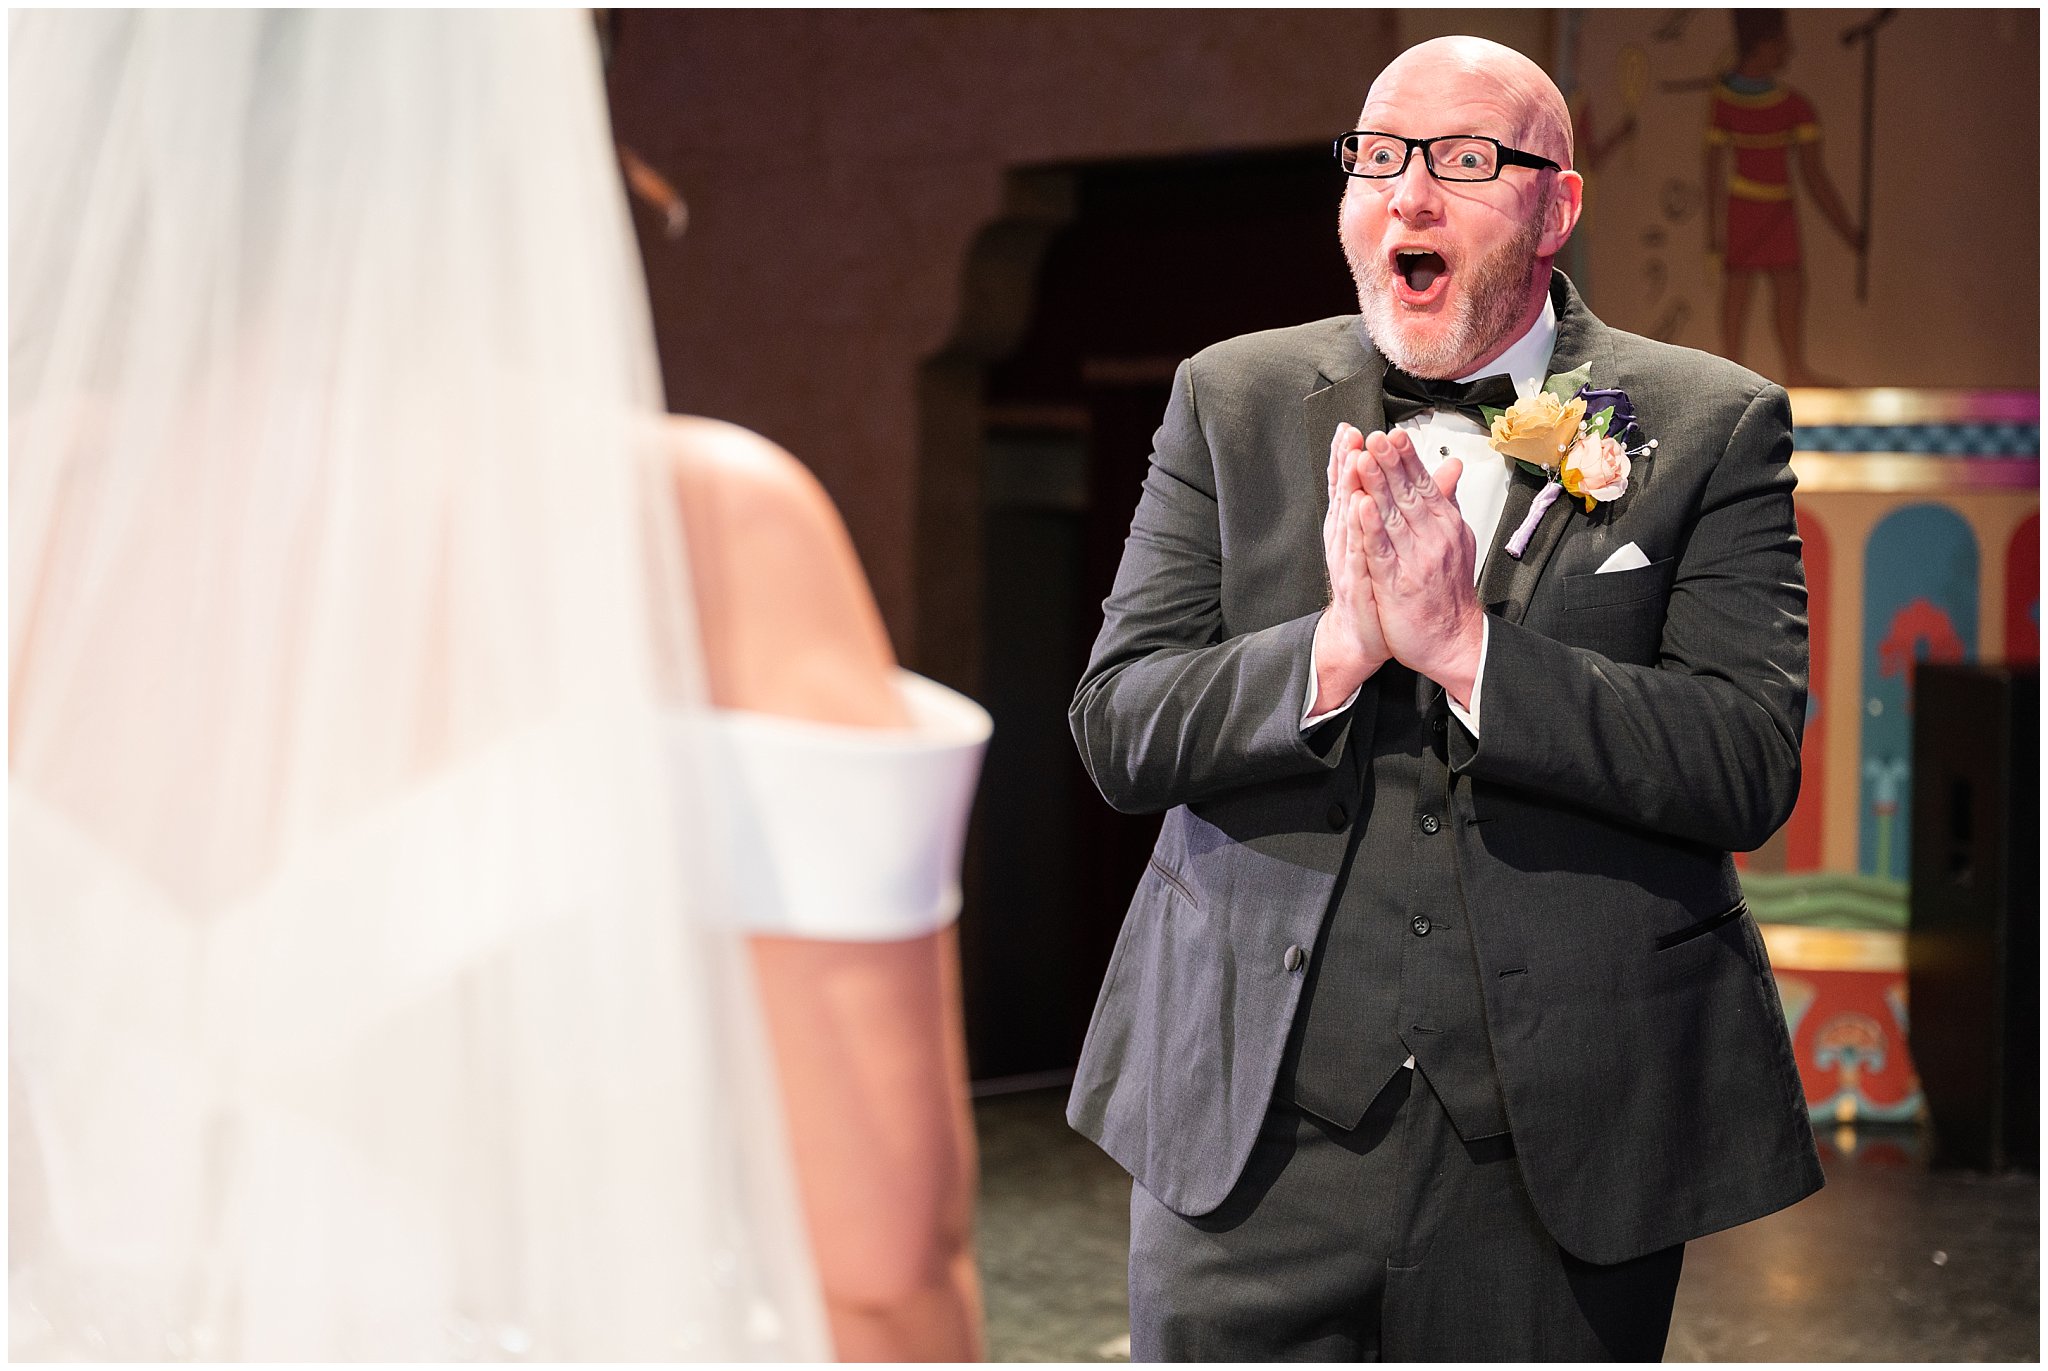 Bride and groom first look moment on stage | Broadway Musical Theatre Wedding